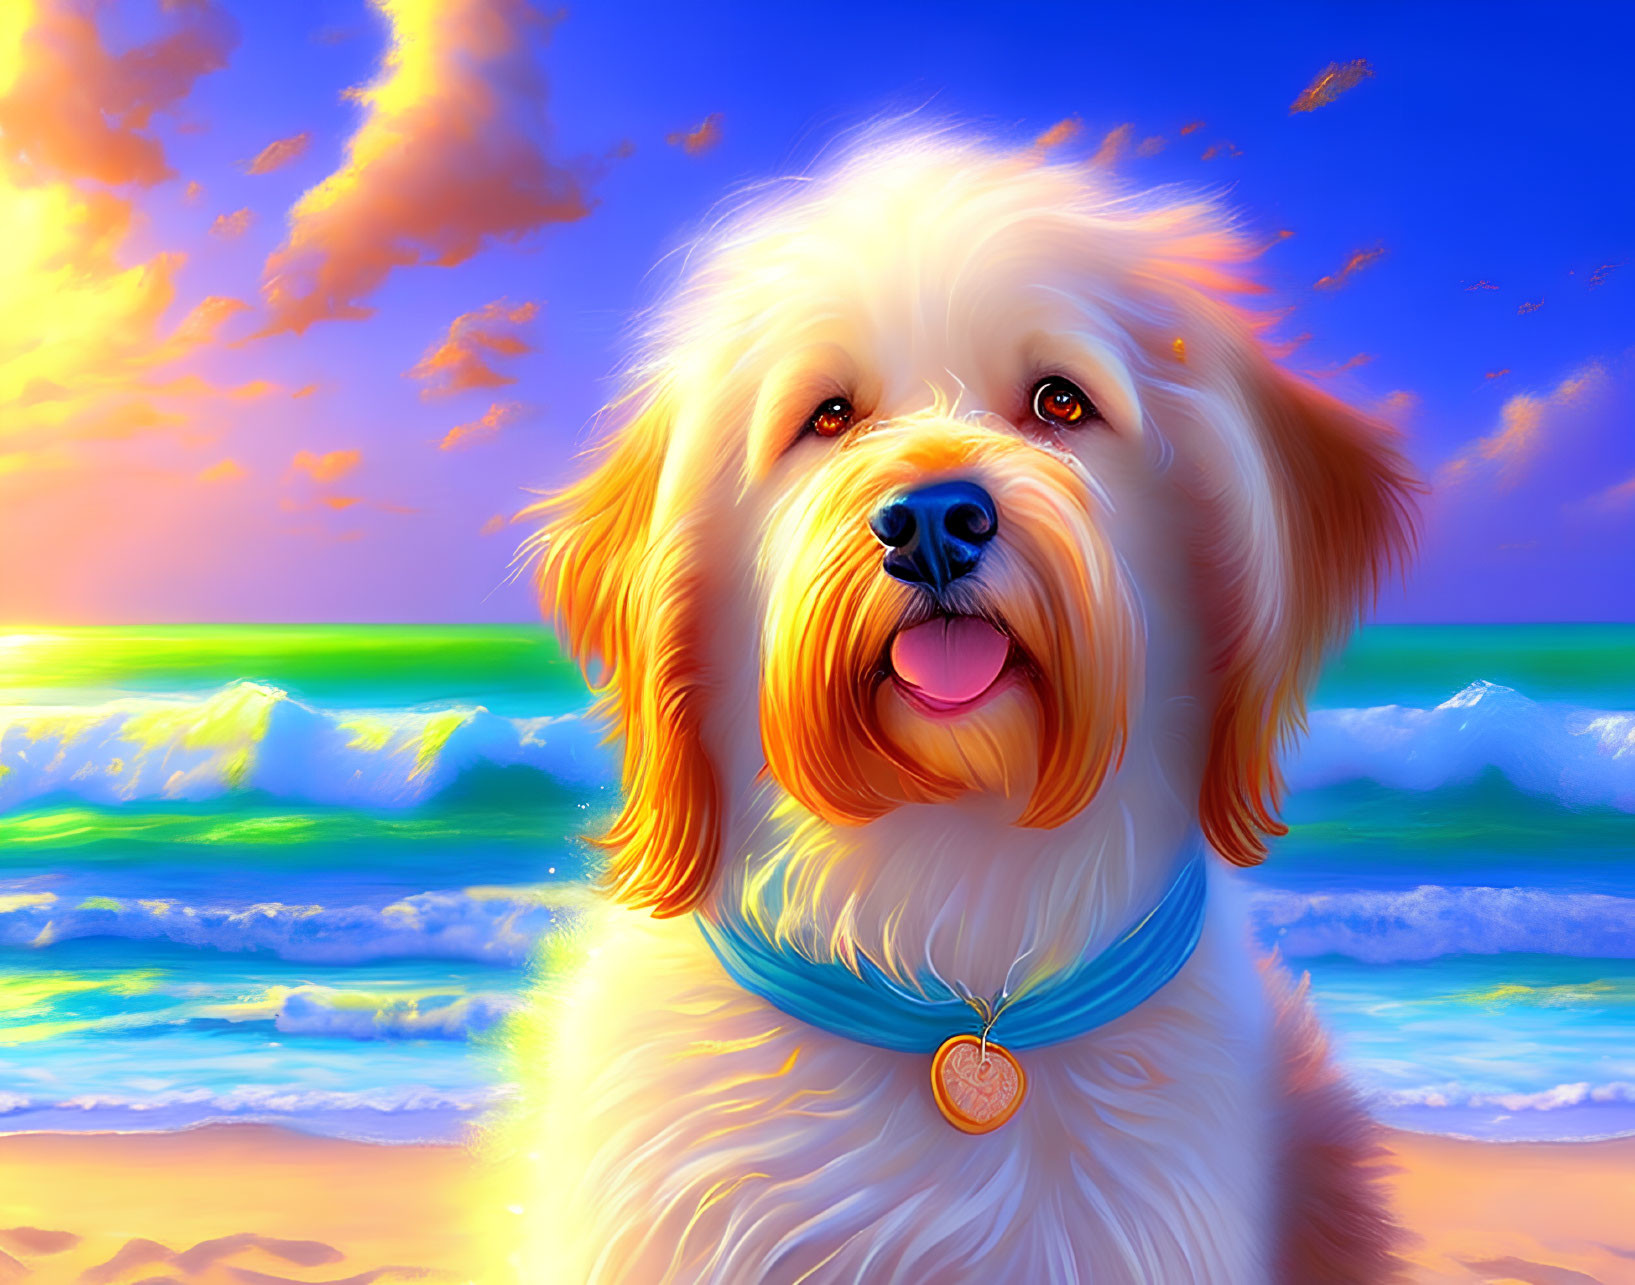 Fluffy Golden Dog with Blue Collar in Vibrant Beachscape